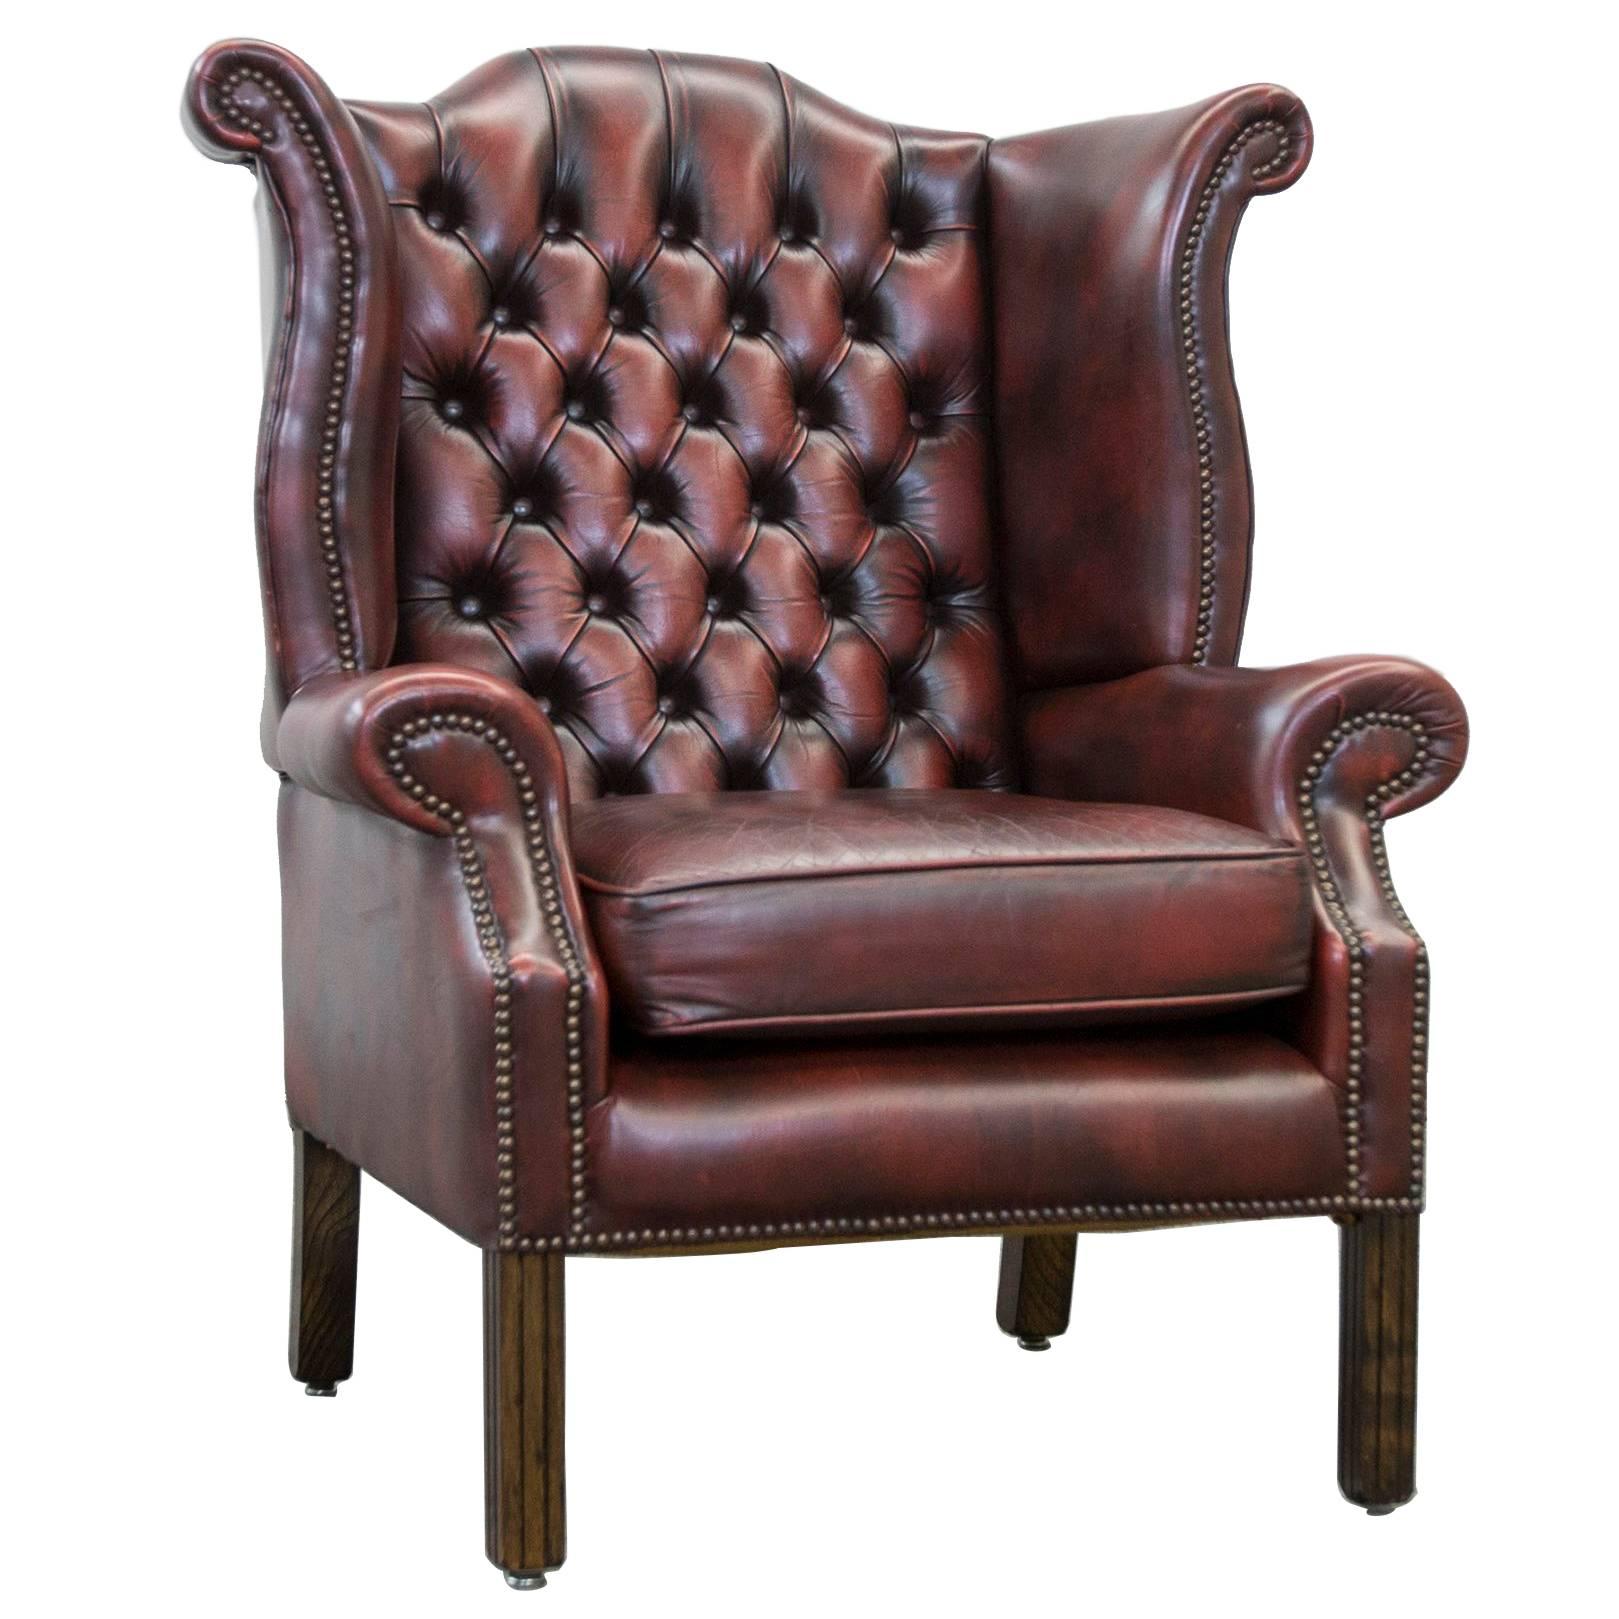 Chesterfield Leather Wingchair in Oxblood Red, One Seat Vintage, Retro For Sale